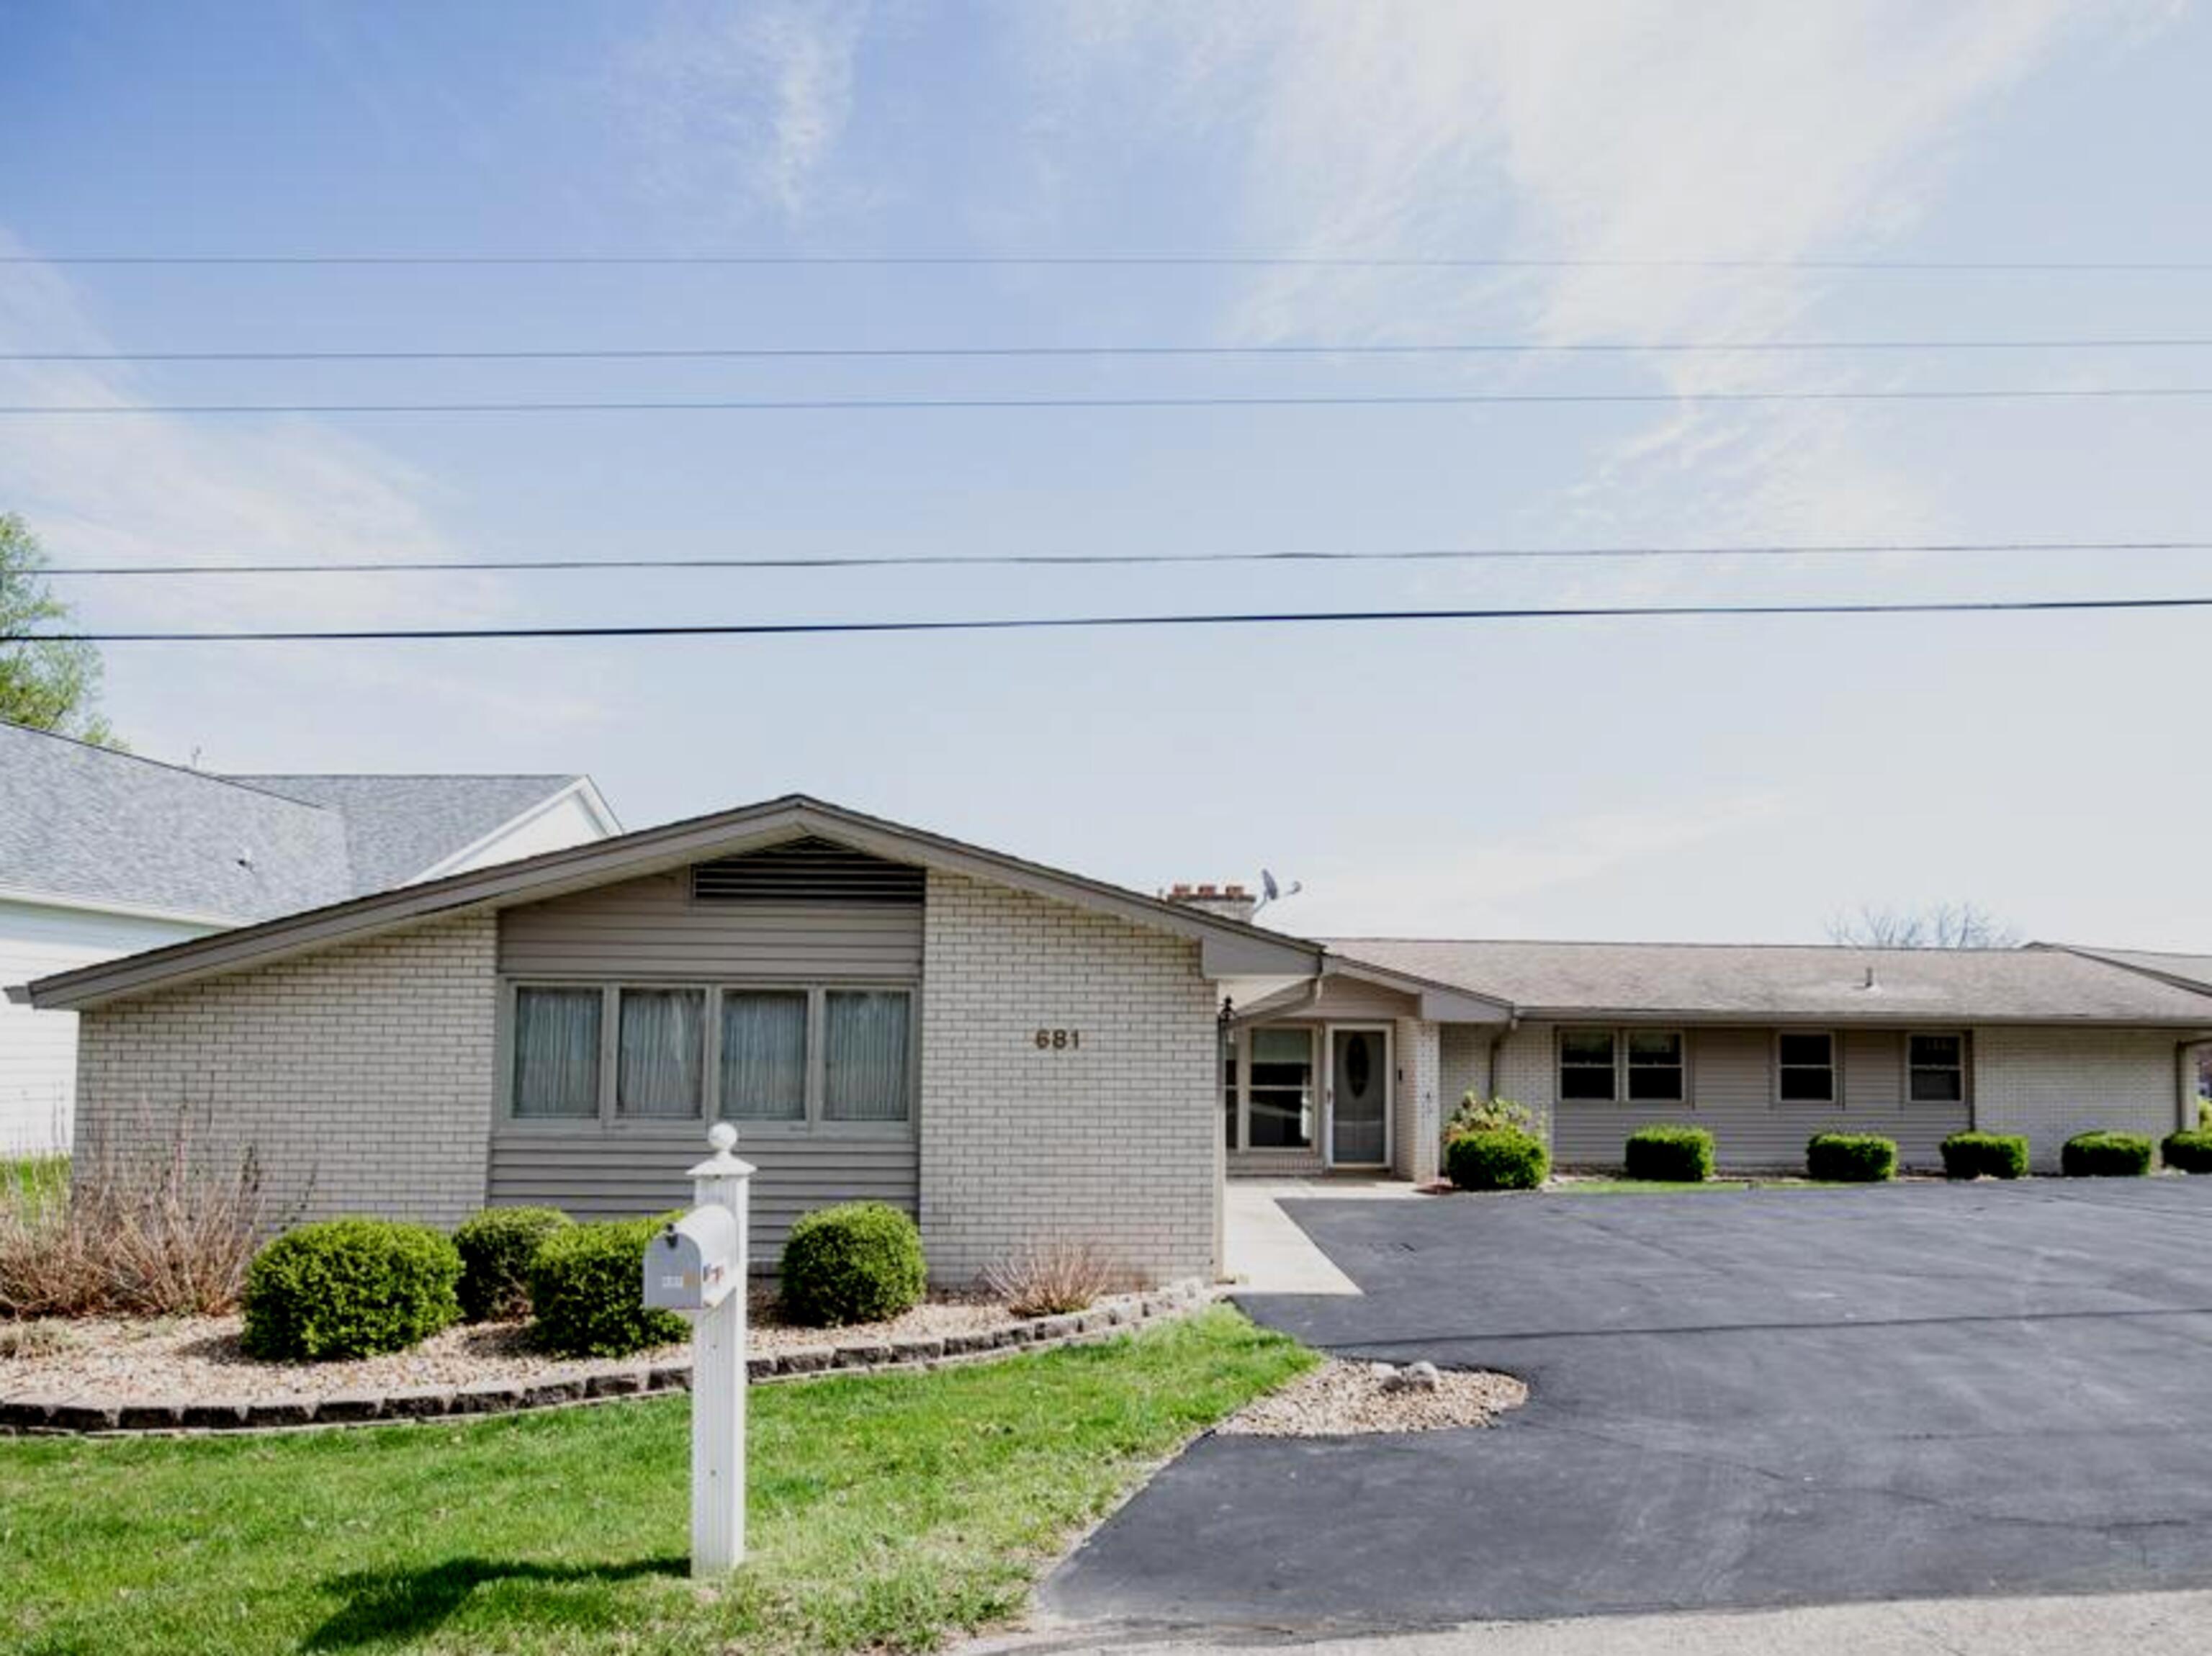 Photo of 681 E North Shore Drive Brownstown, IN 47220